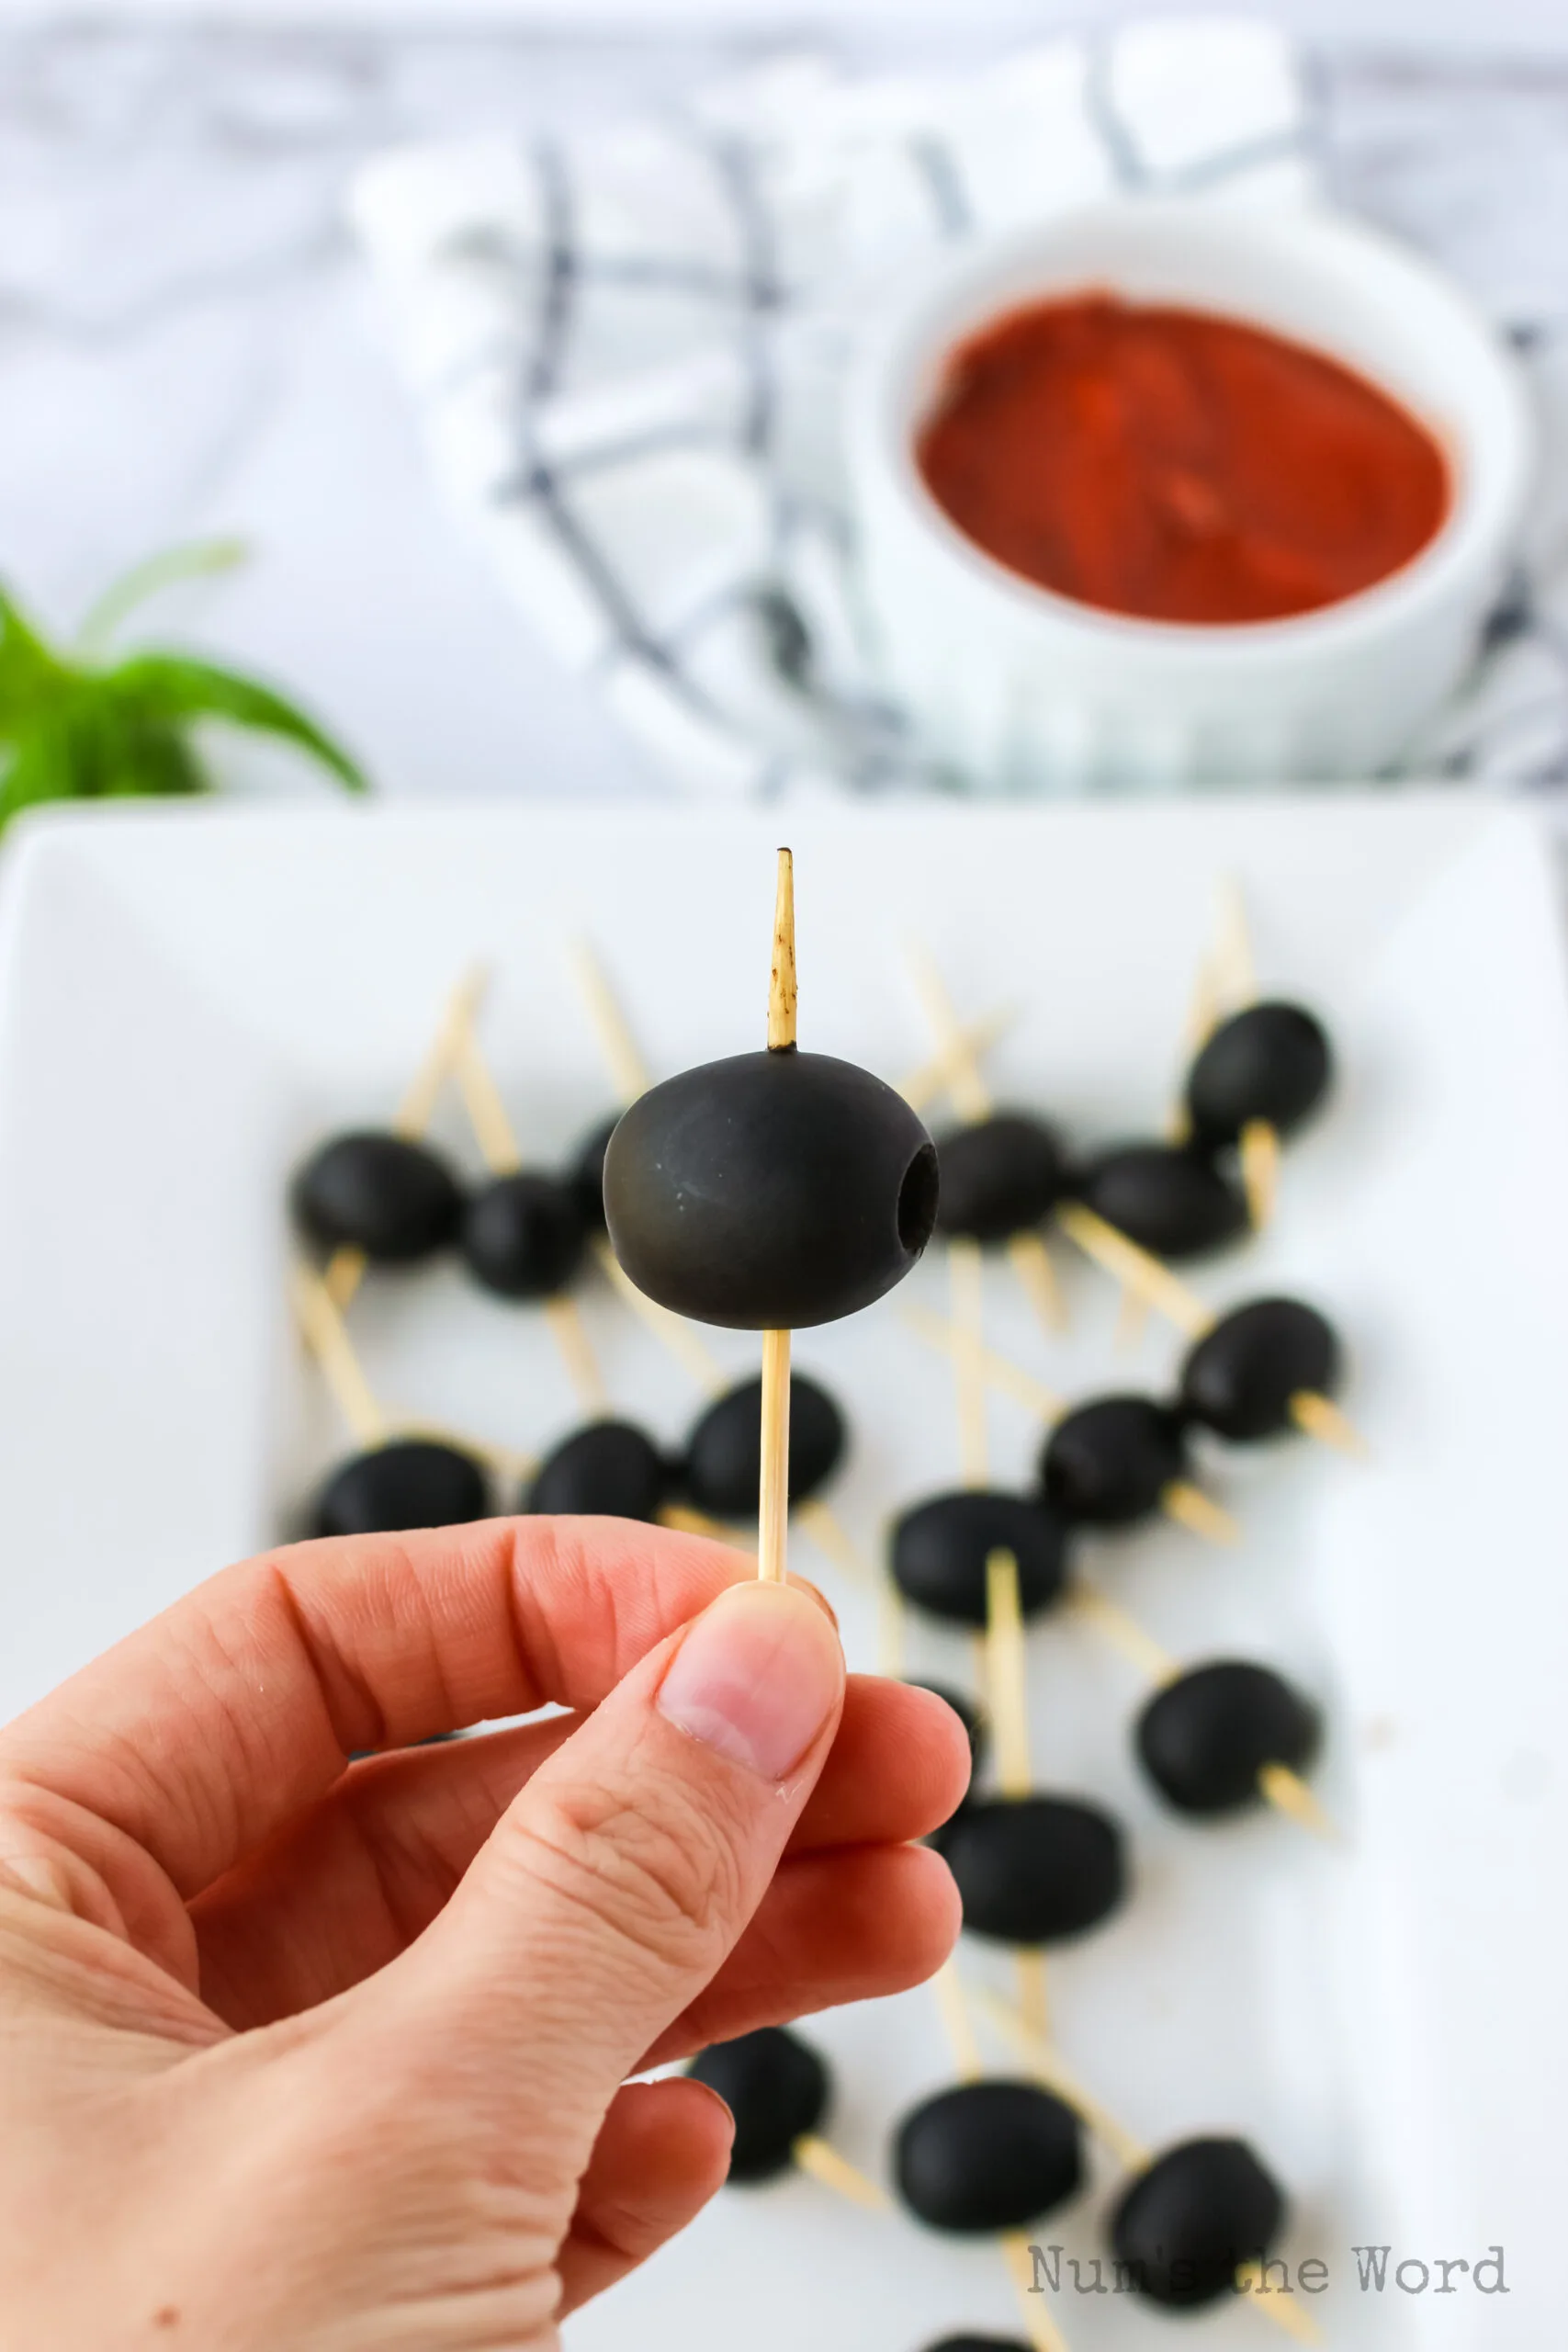 Toothpick with a black olive on the end